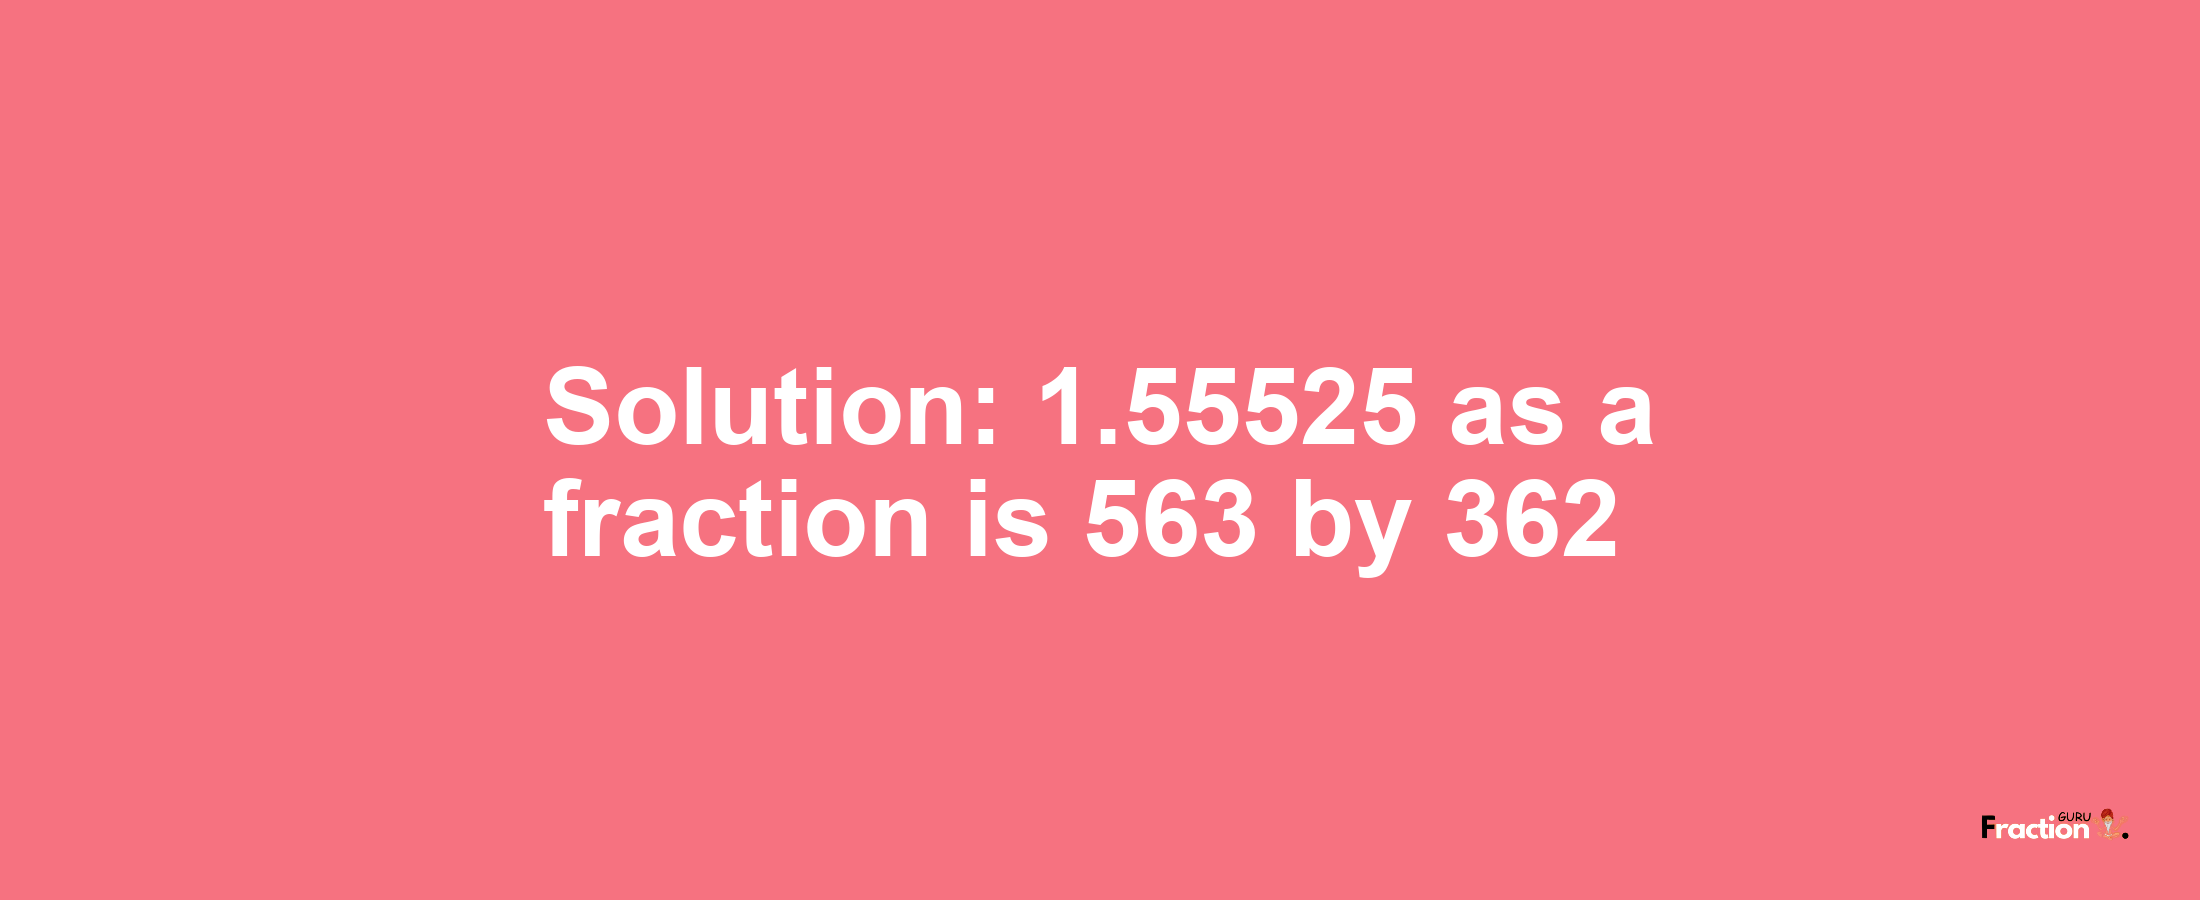 Solution:1.55525 as a fraction is 563/362